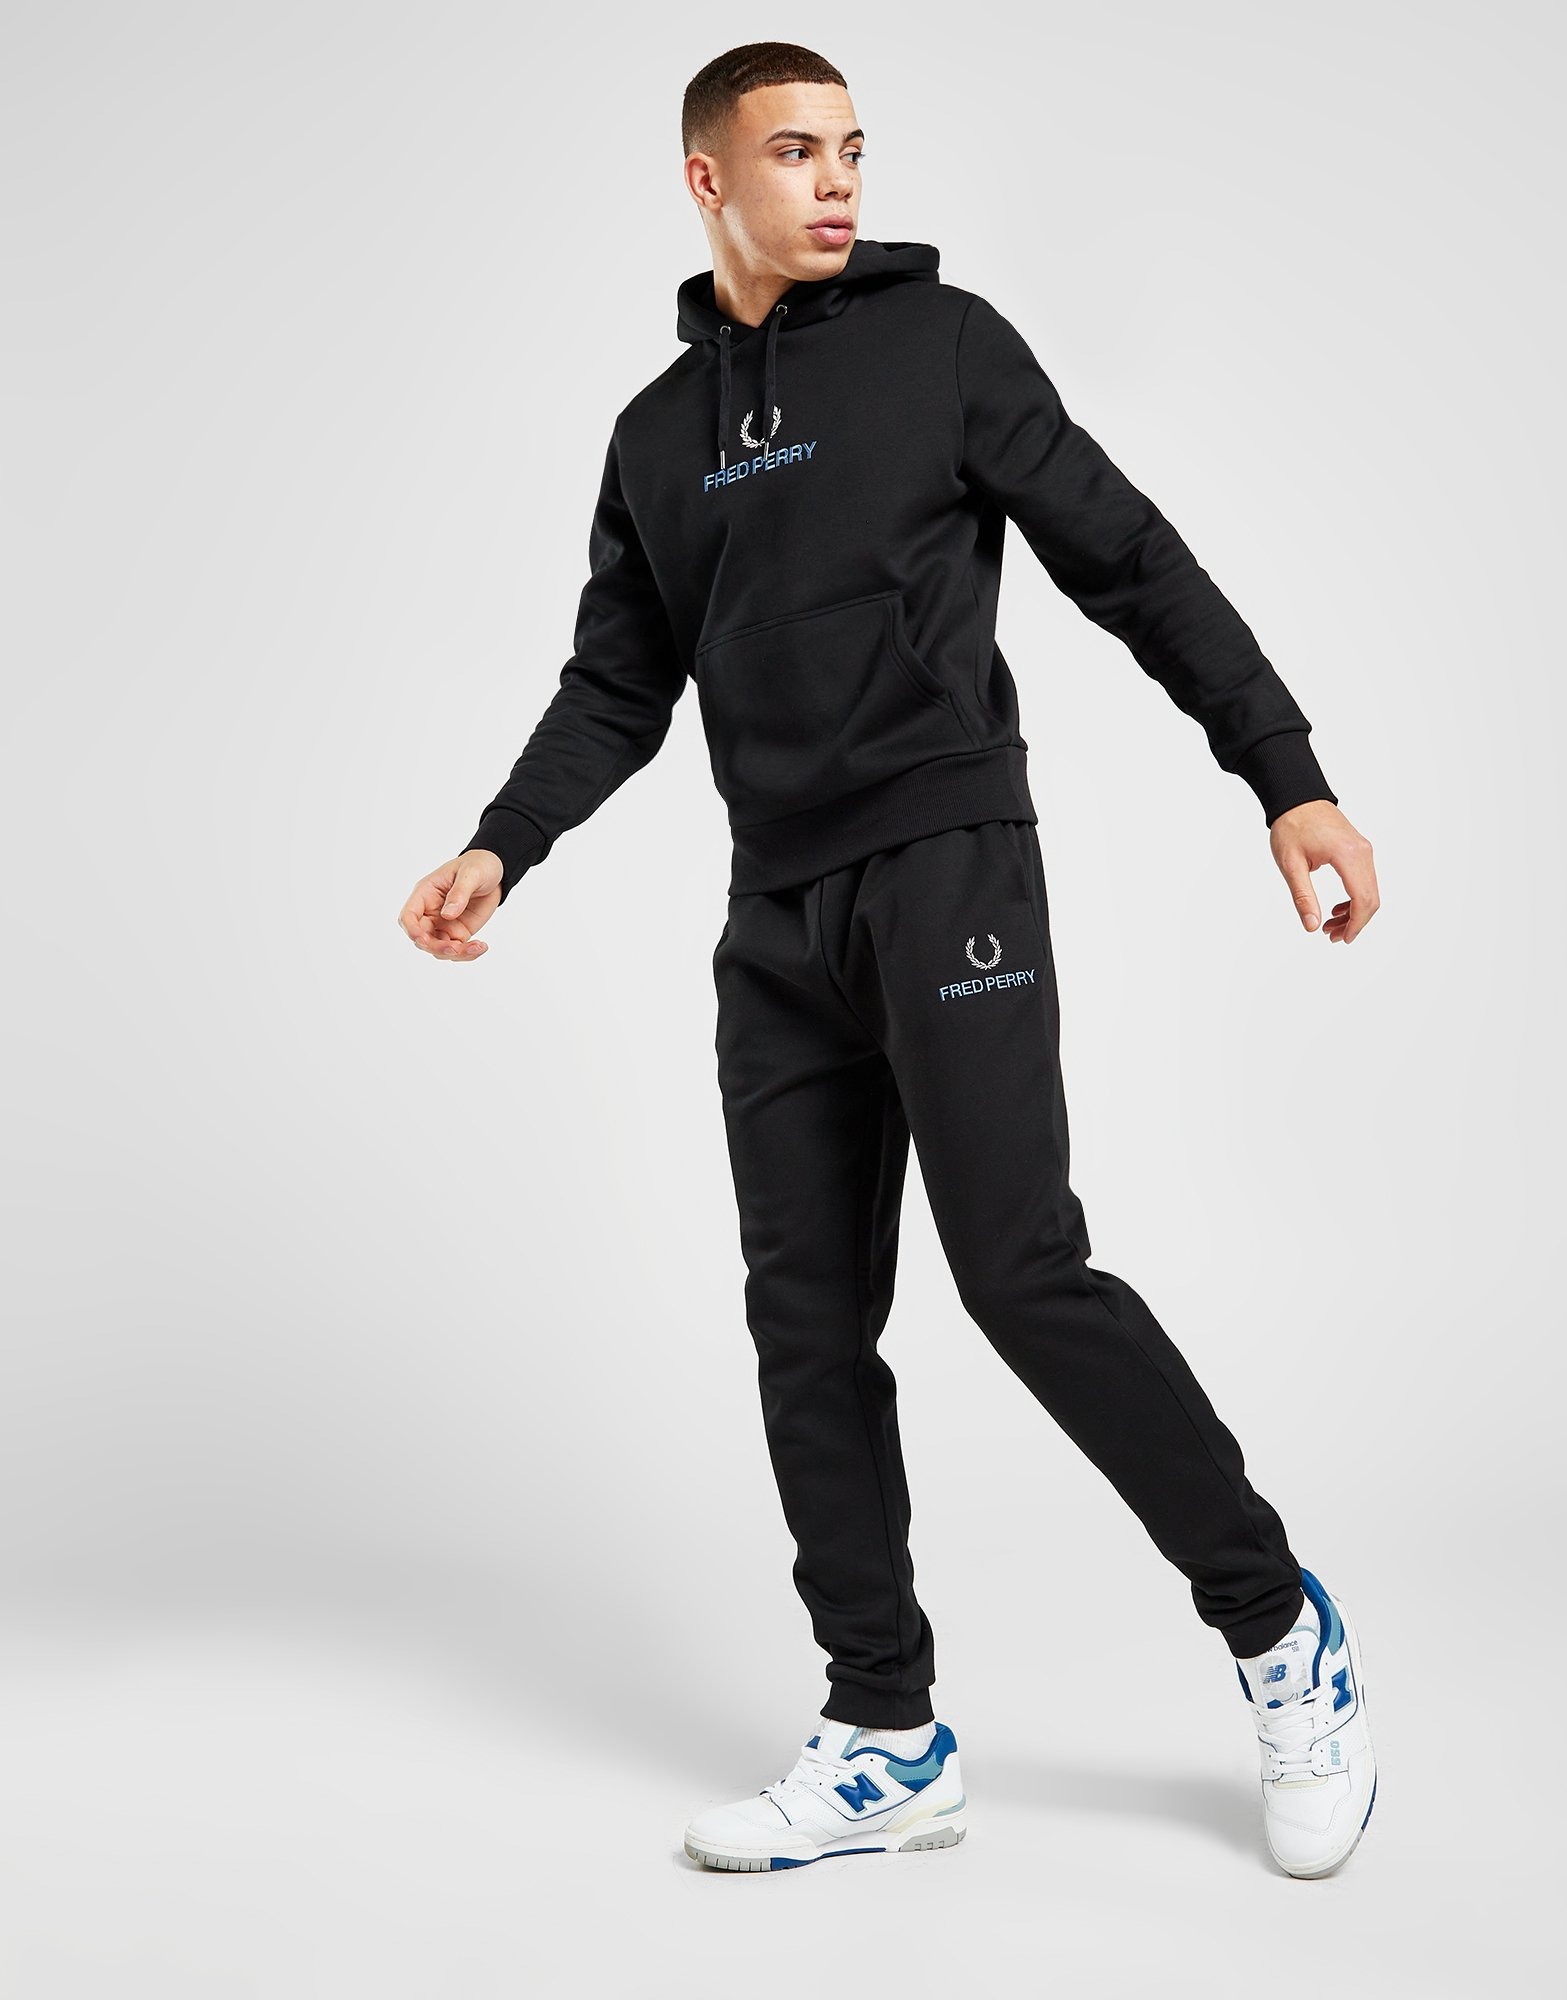 Reflectie Bourgeon koppeling Black Fred Perry Global Stack Joggers | JD Sports Global